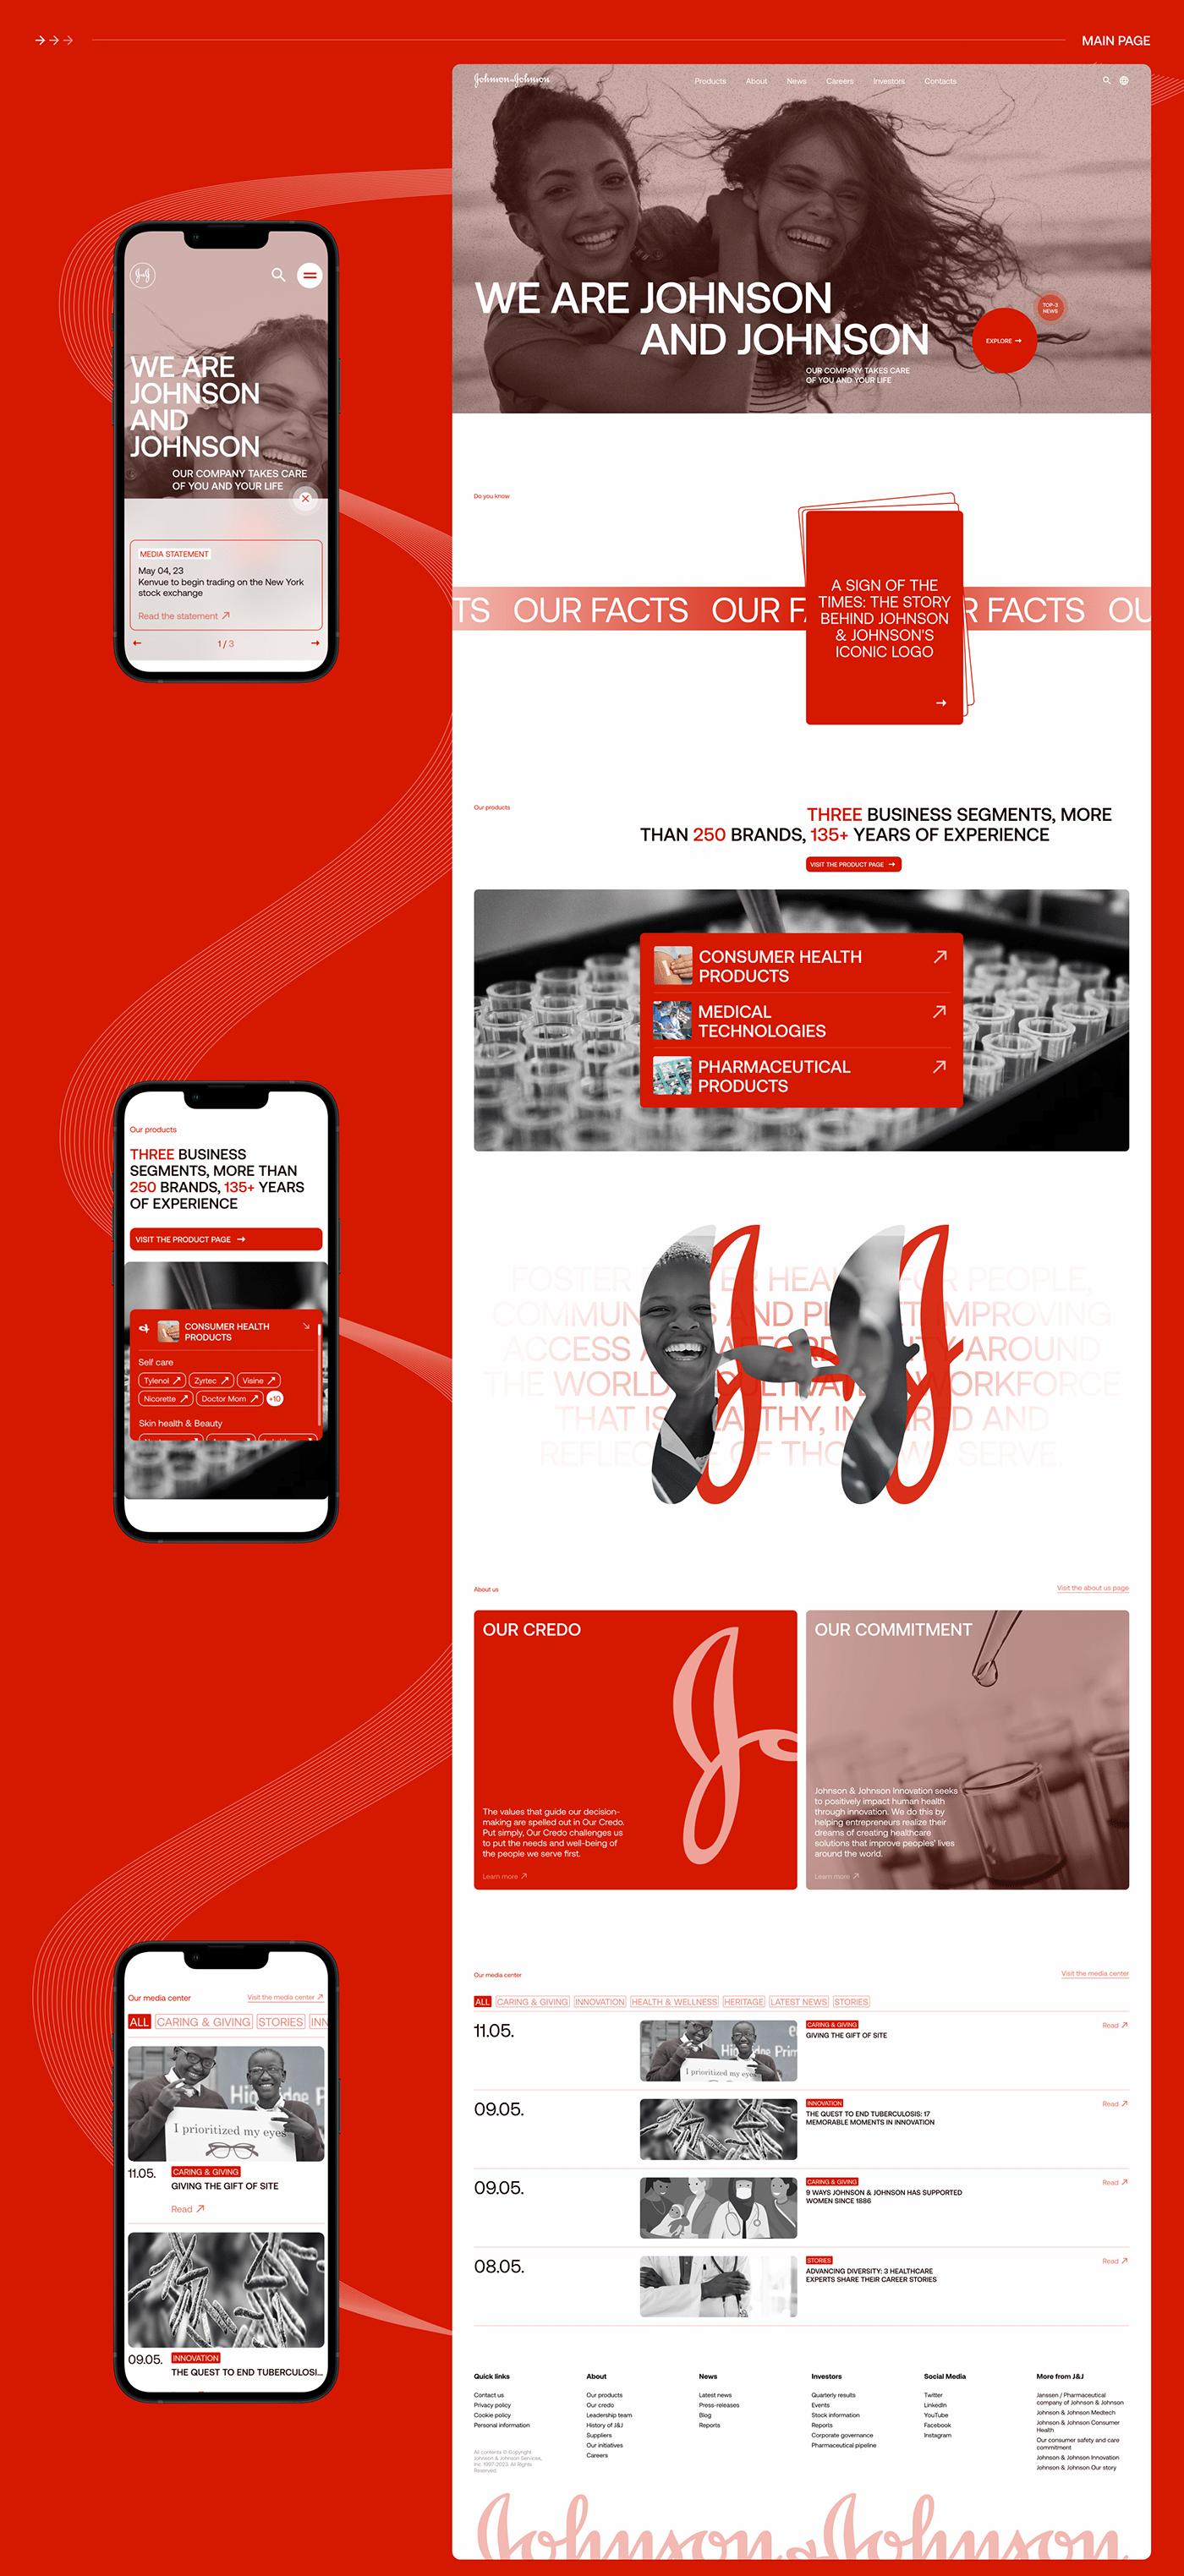 figma design after effects animation Johnson & Johnson Pharmaceutical redesign website uprock interactive animation  Pharma Corporate Design